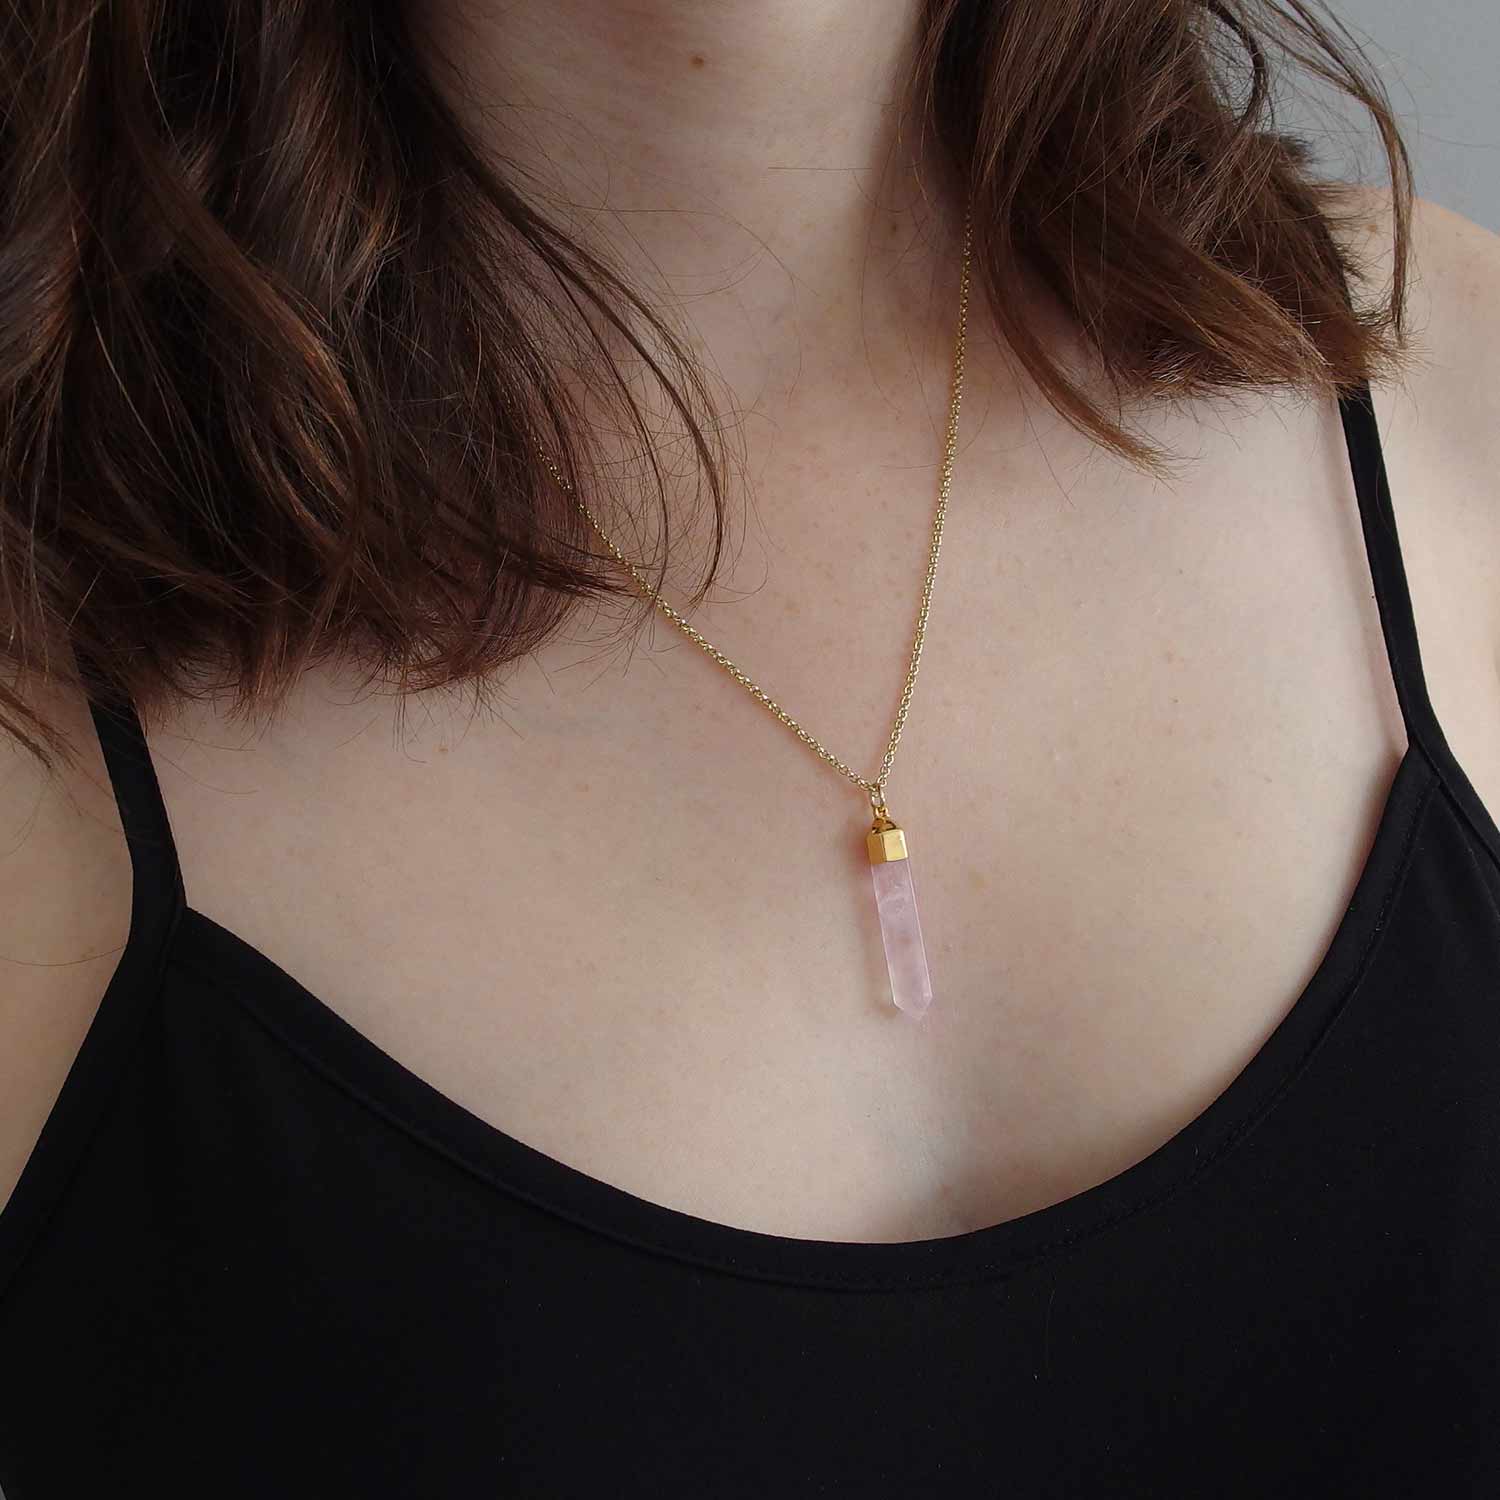 Crystal Healing Stone Necklaces – MaeMae Jewelry